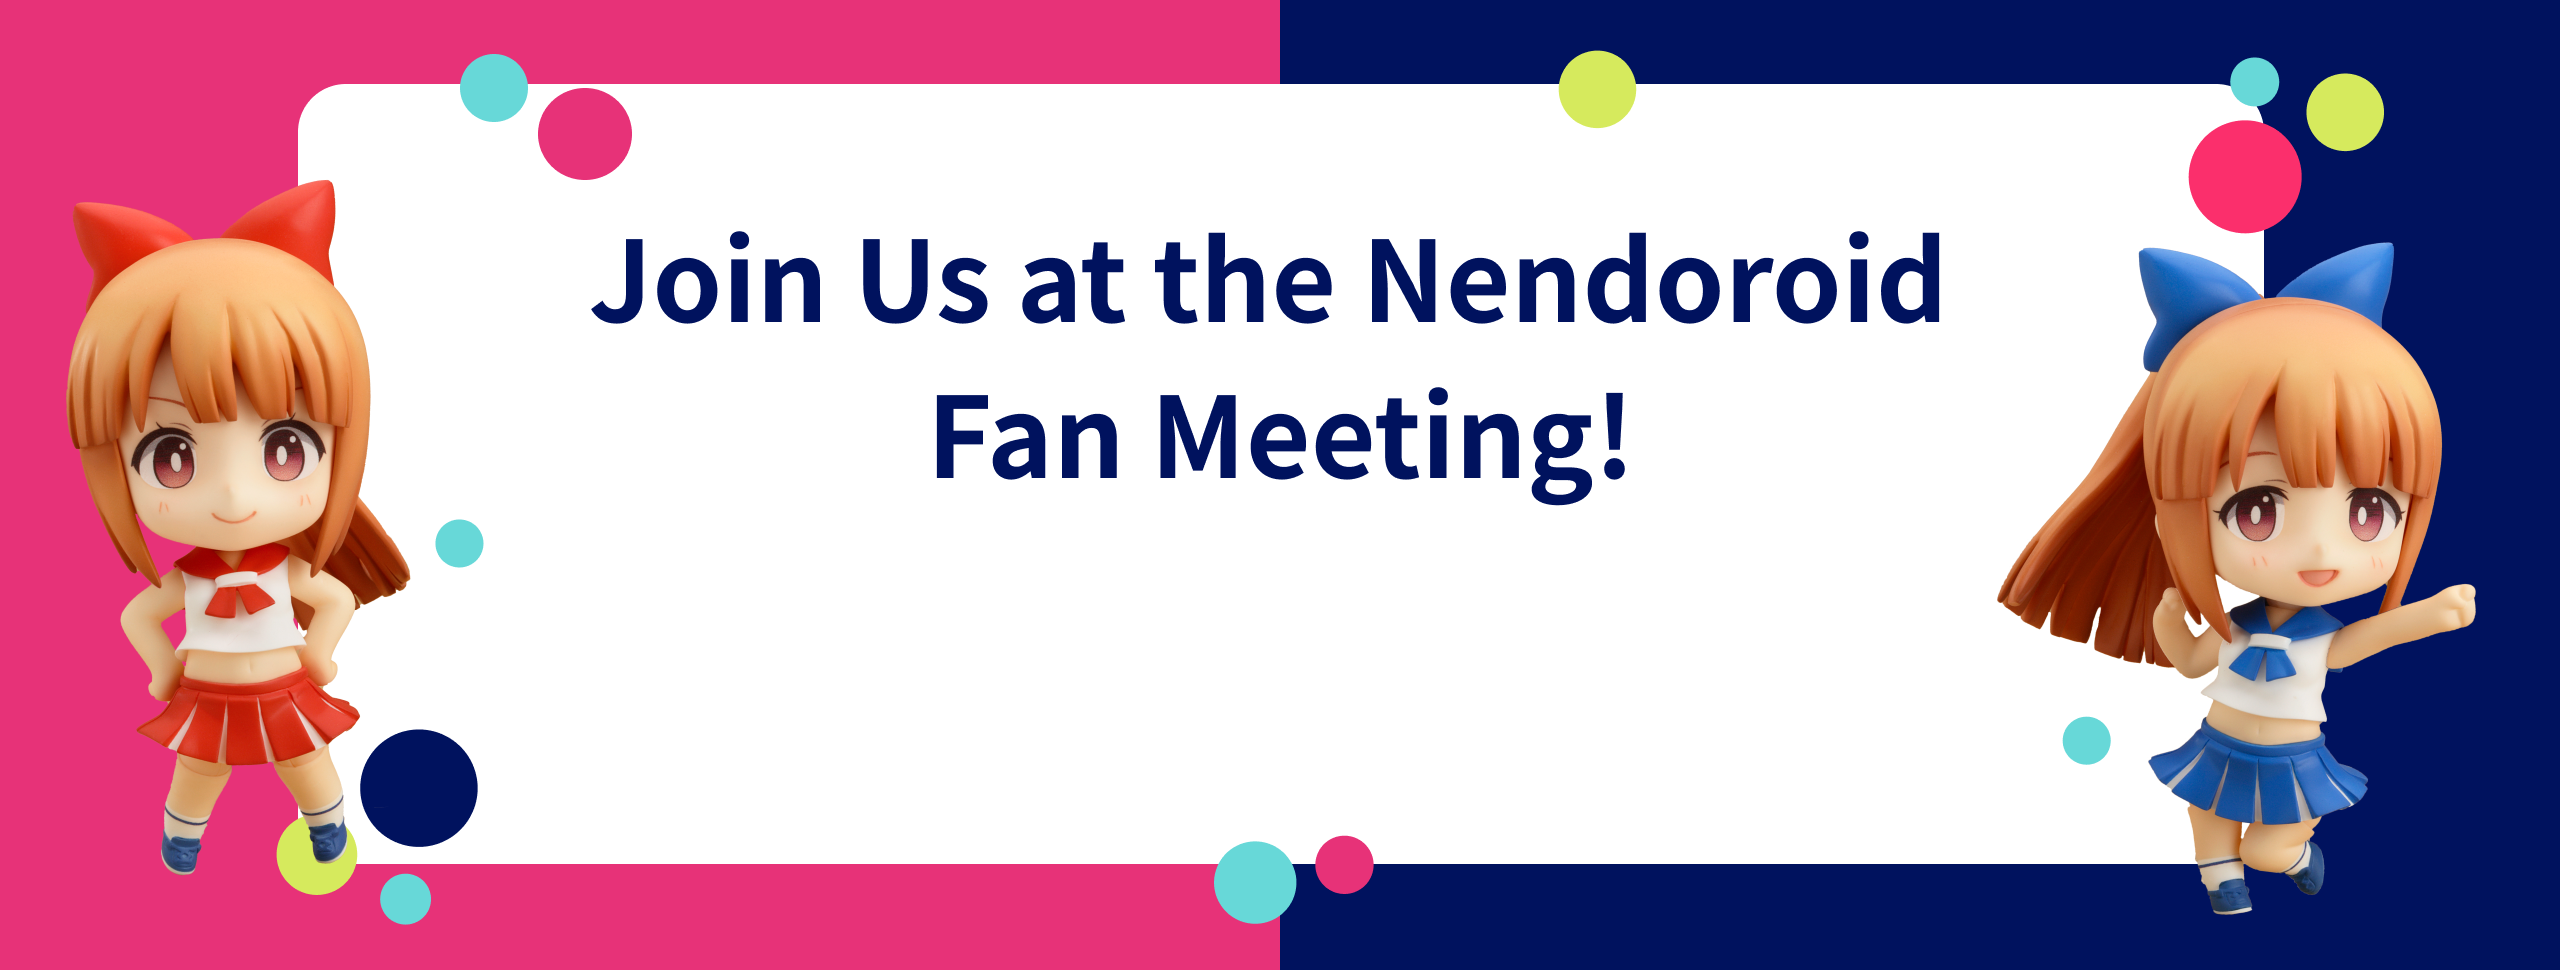 Join Us at the Nendoroid Fan Meeting!